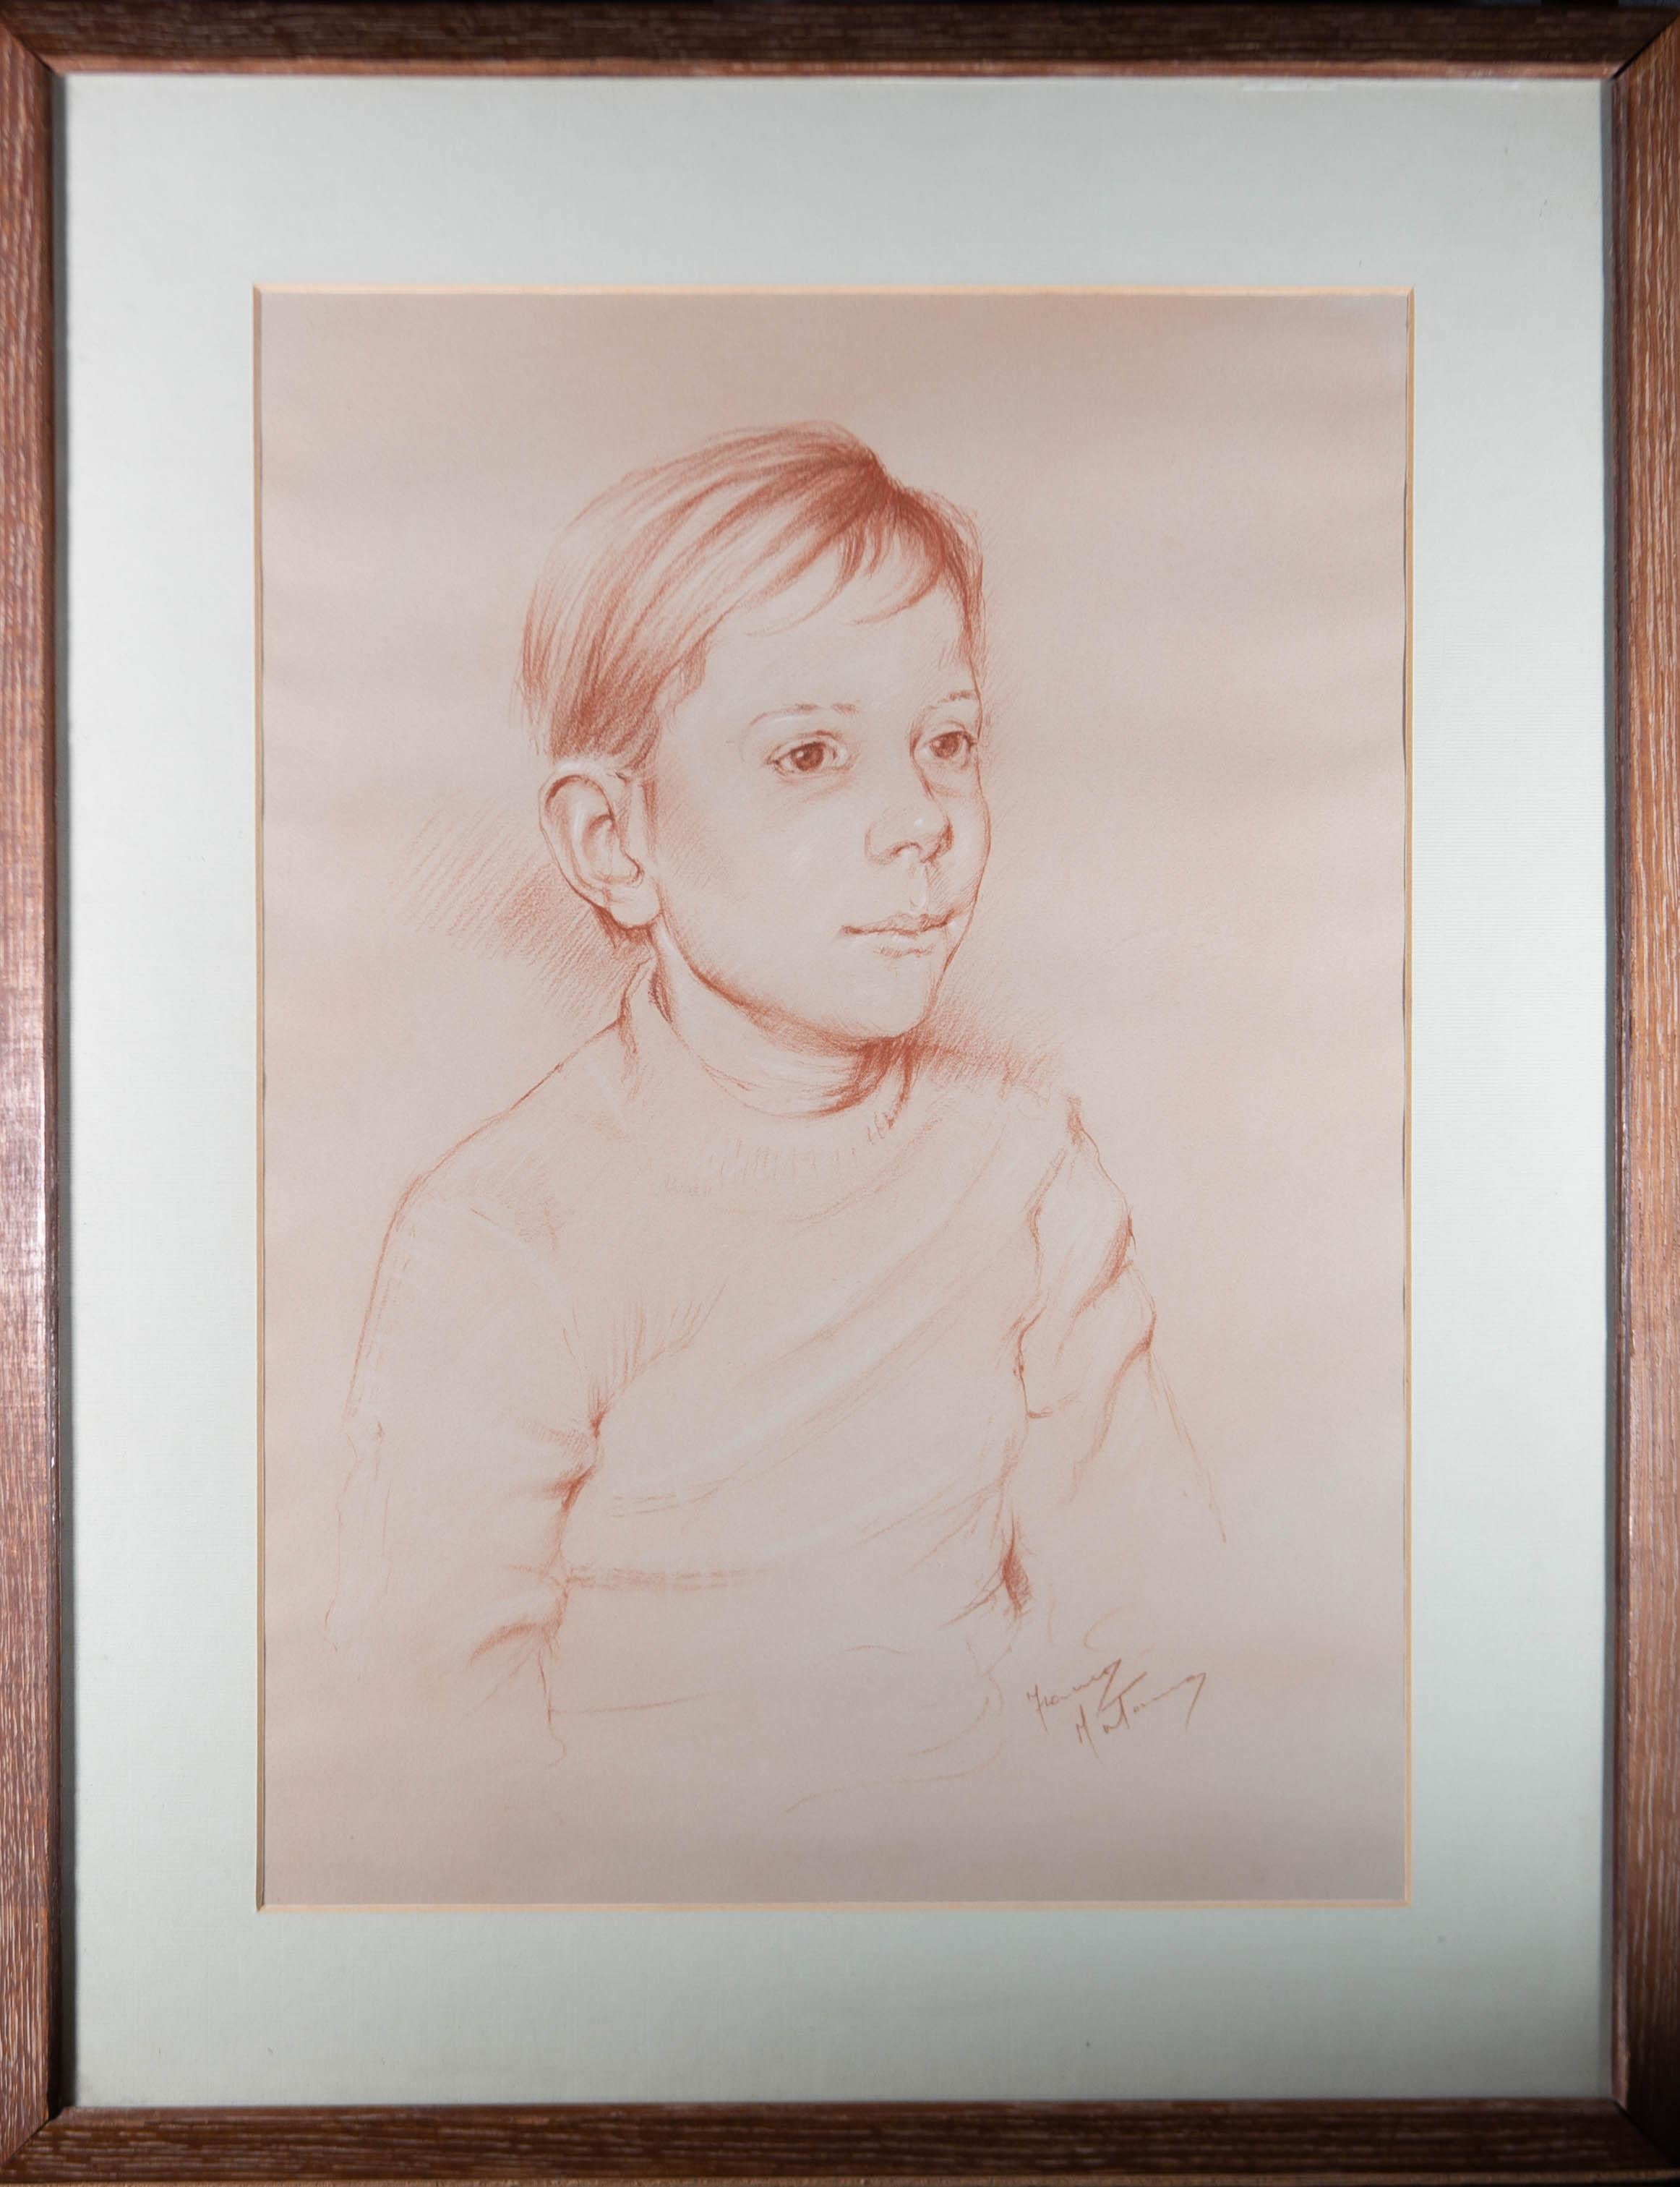 Subtle conte is used in a sculptural manner to render a delicate study of a child. The artwork has been completed on a piece of pale rose wove, which perfectly complements the rich tone of the conte.

The artwork is signed in the bottom right-hand